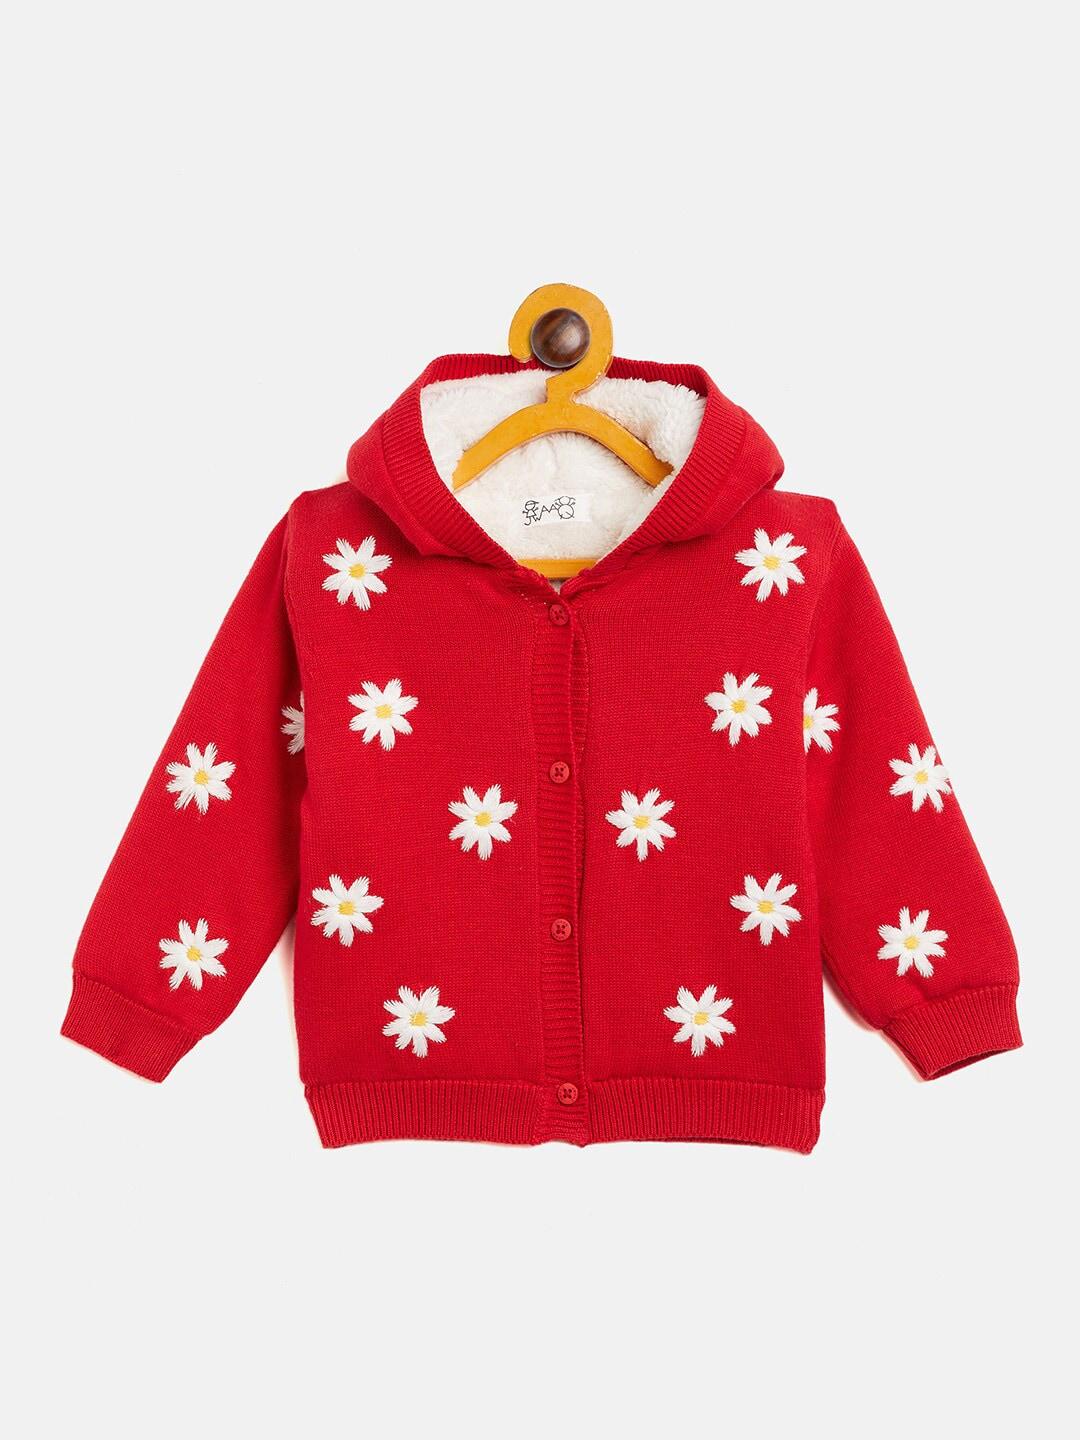 jwaaq kids floral embroidered long sleeves pure cotton hood cardigan sweater